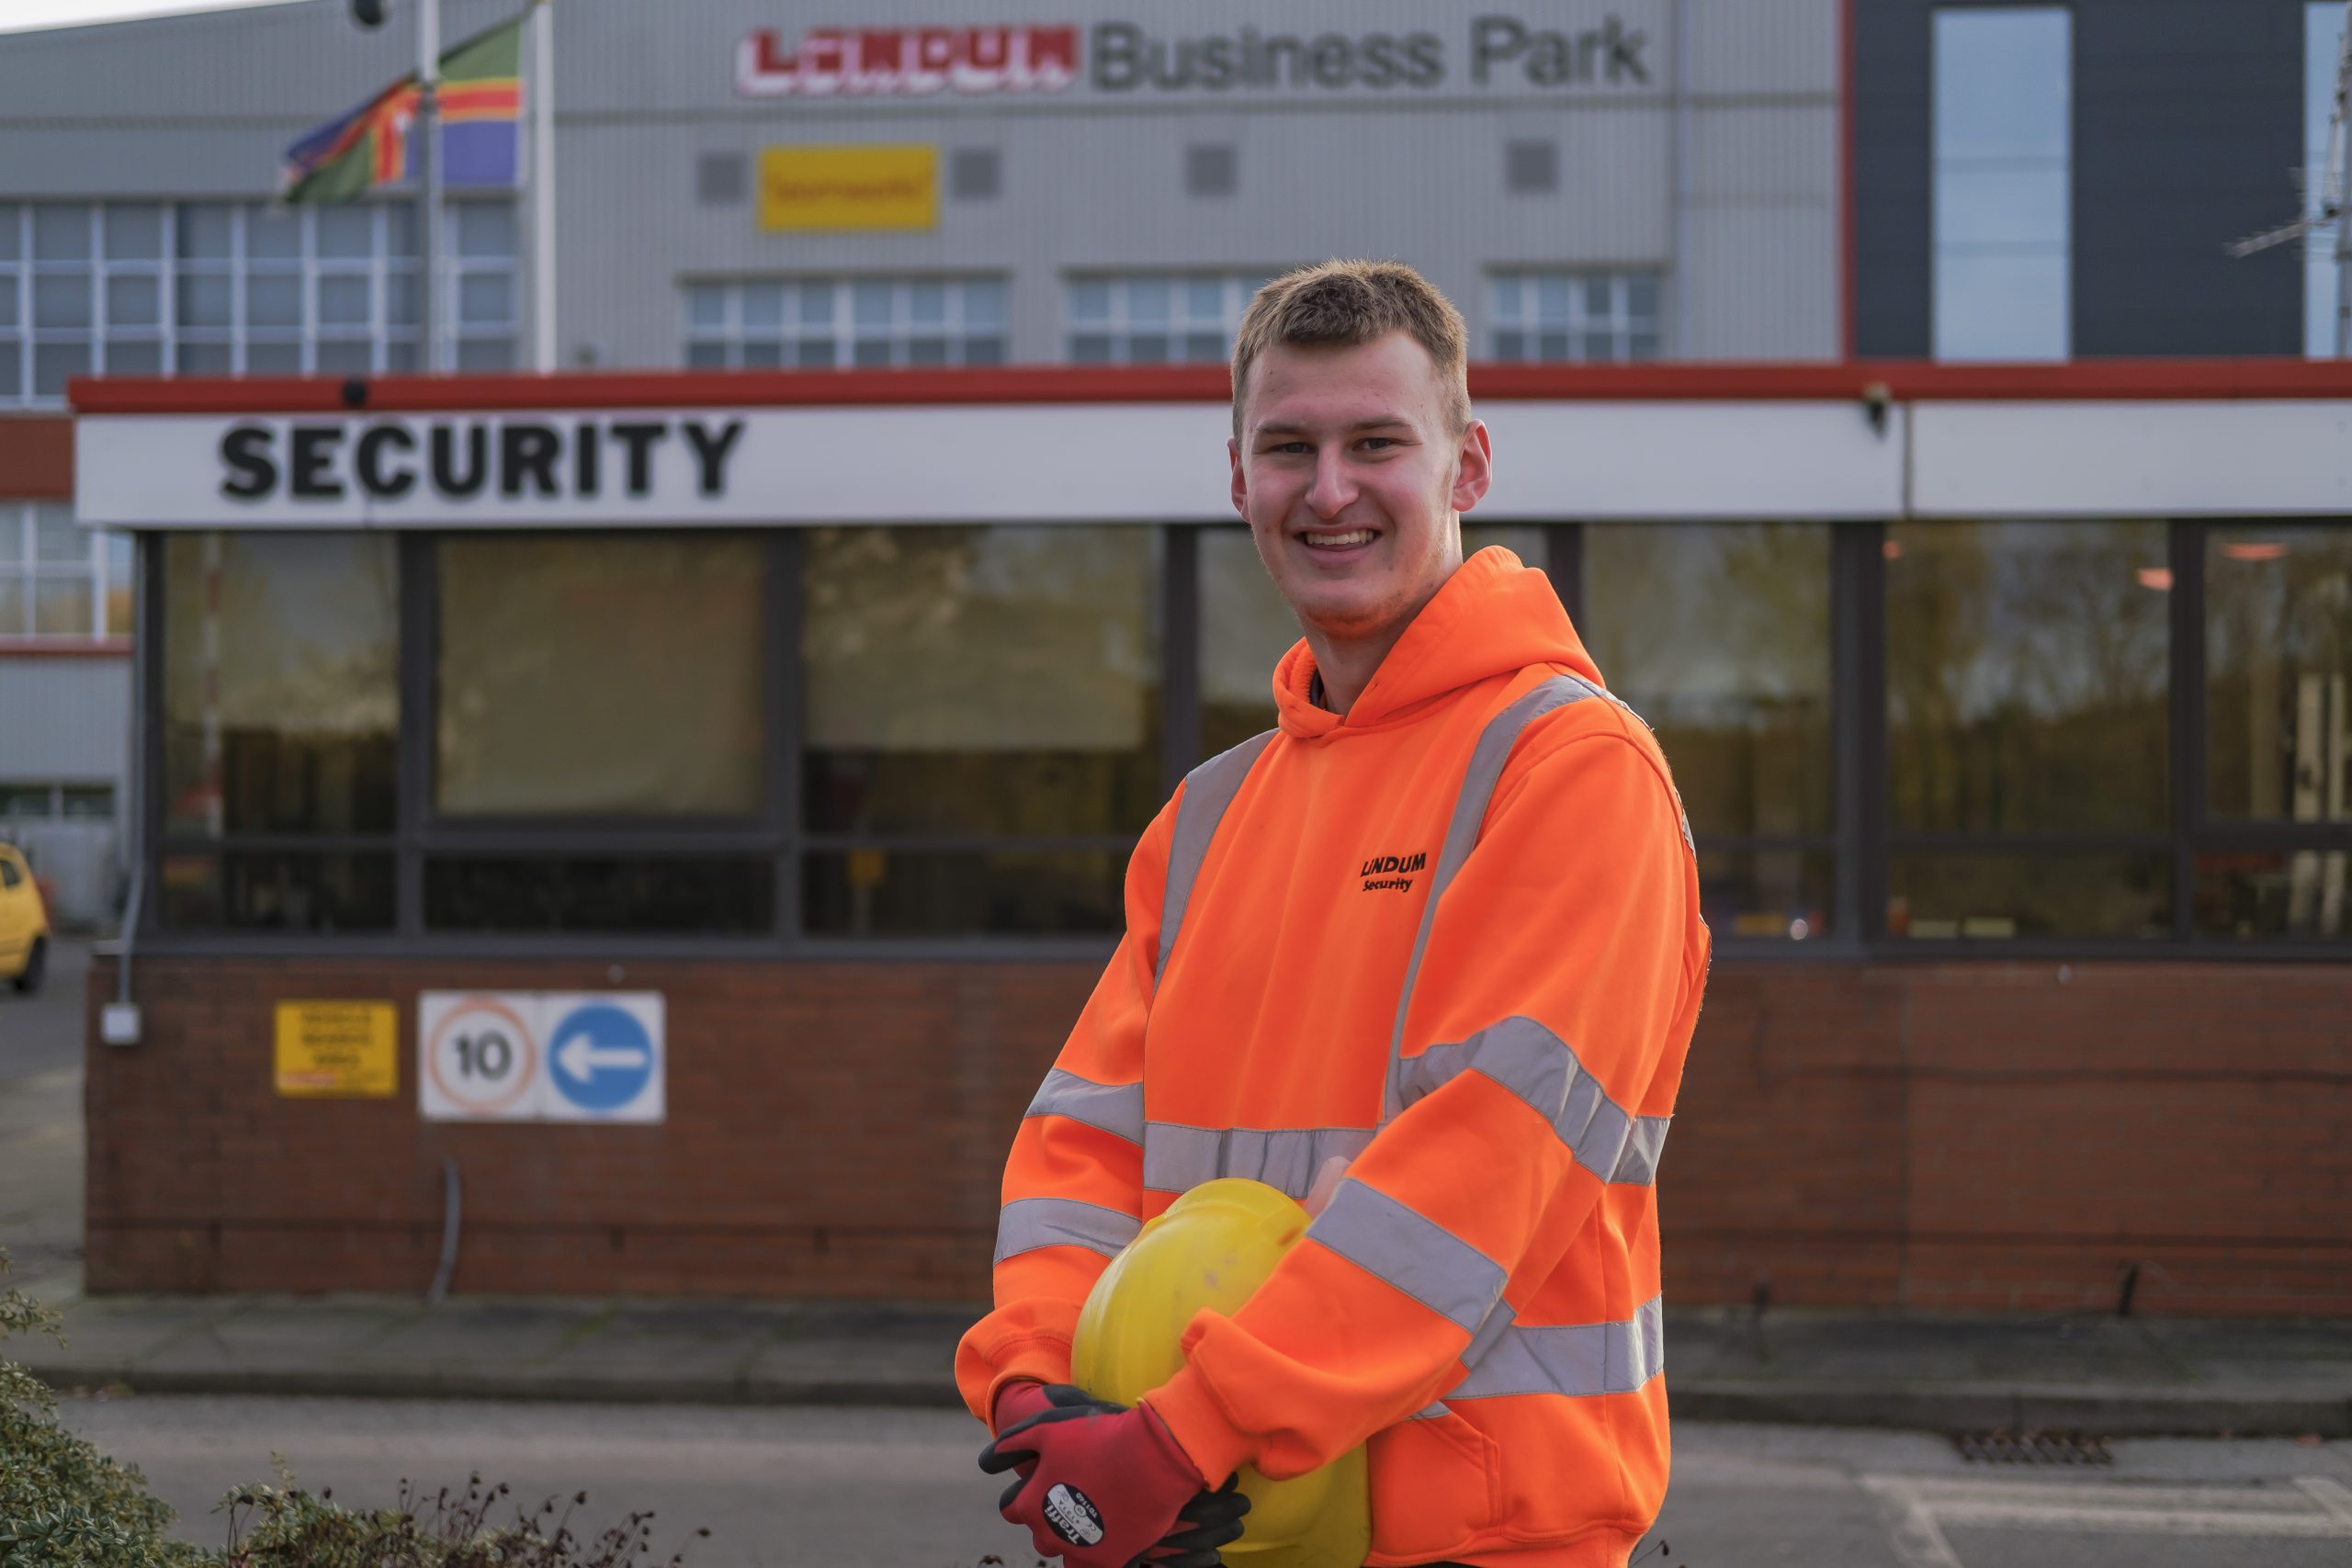 Zak’s leading the way in security qualifications